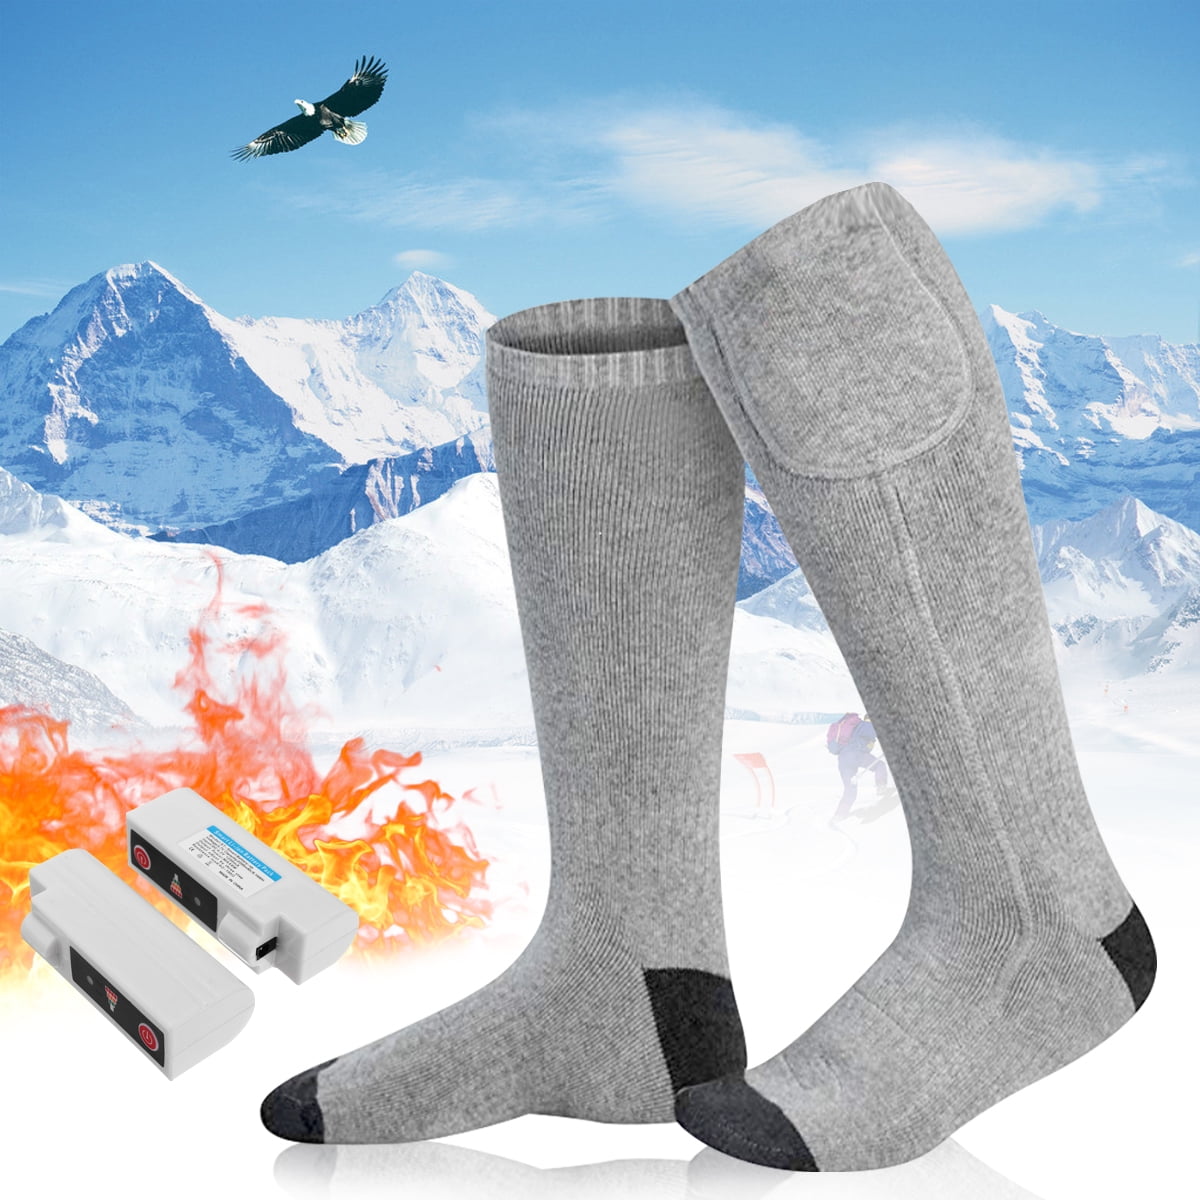 38-55℃ Electric Heated Socks Rechargeable Battery Feet Foot Winter Warm Thermal 